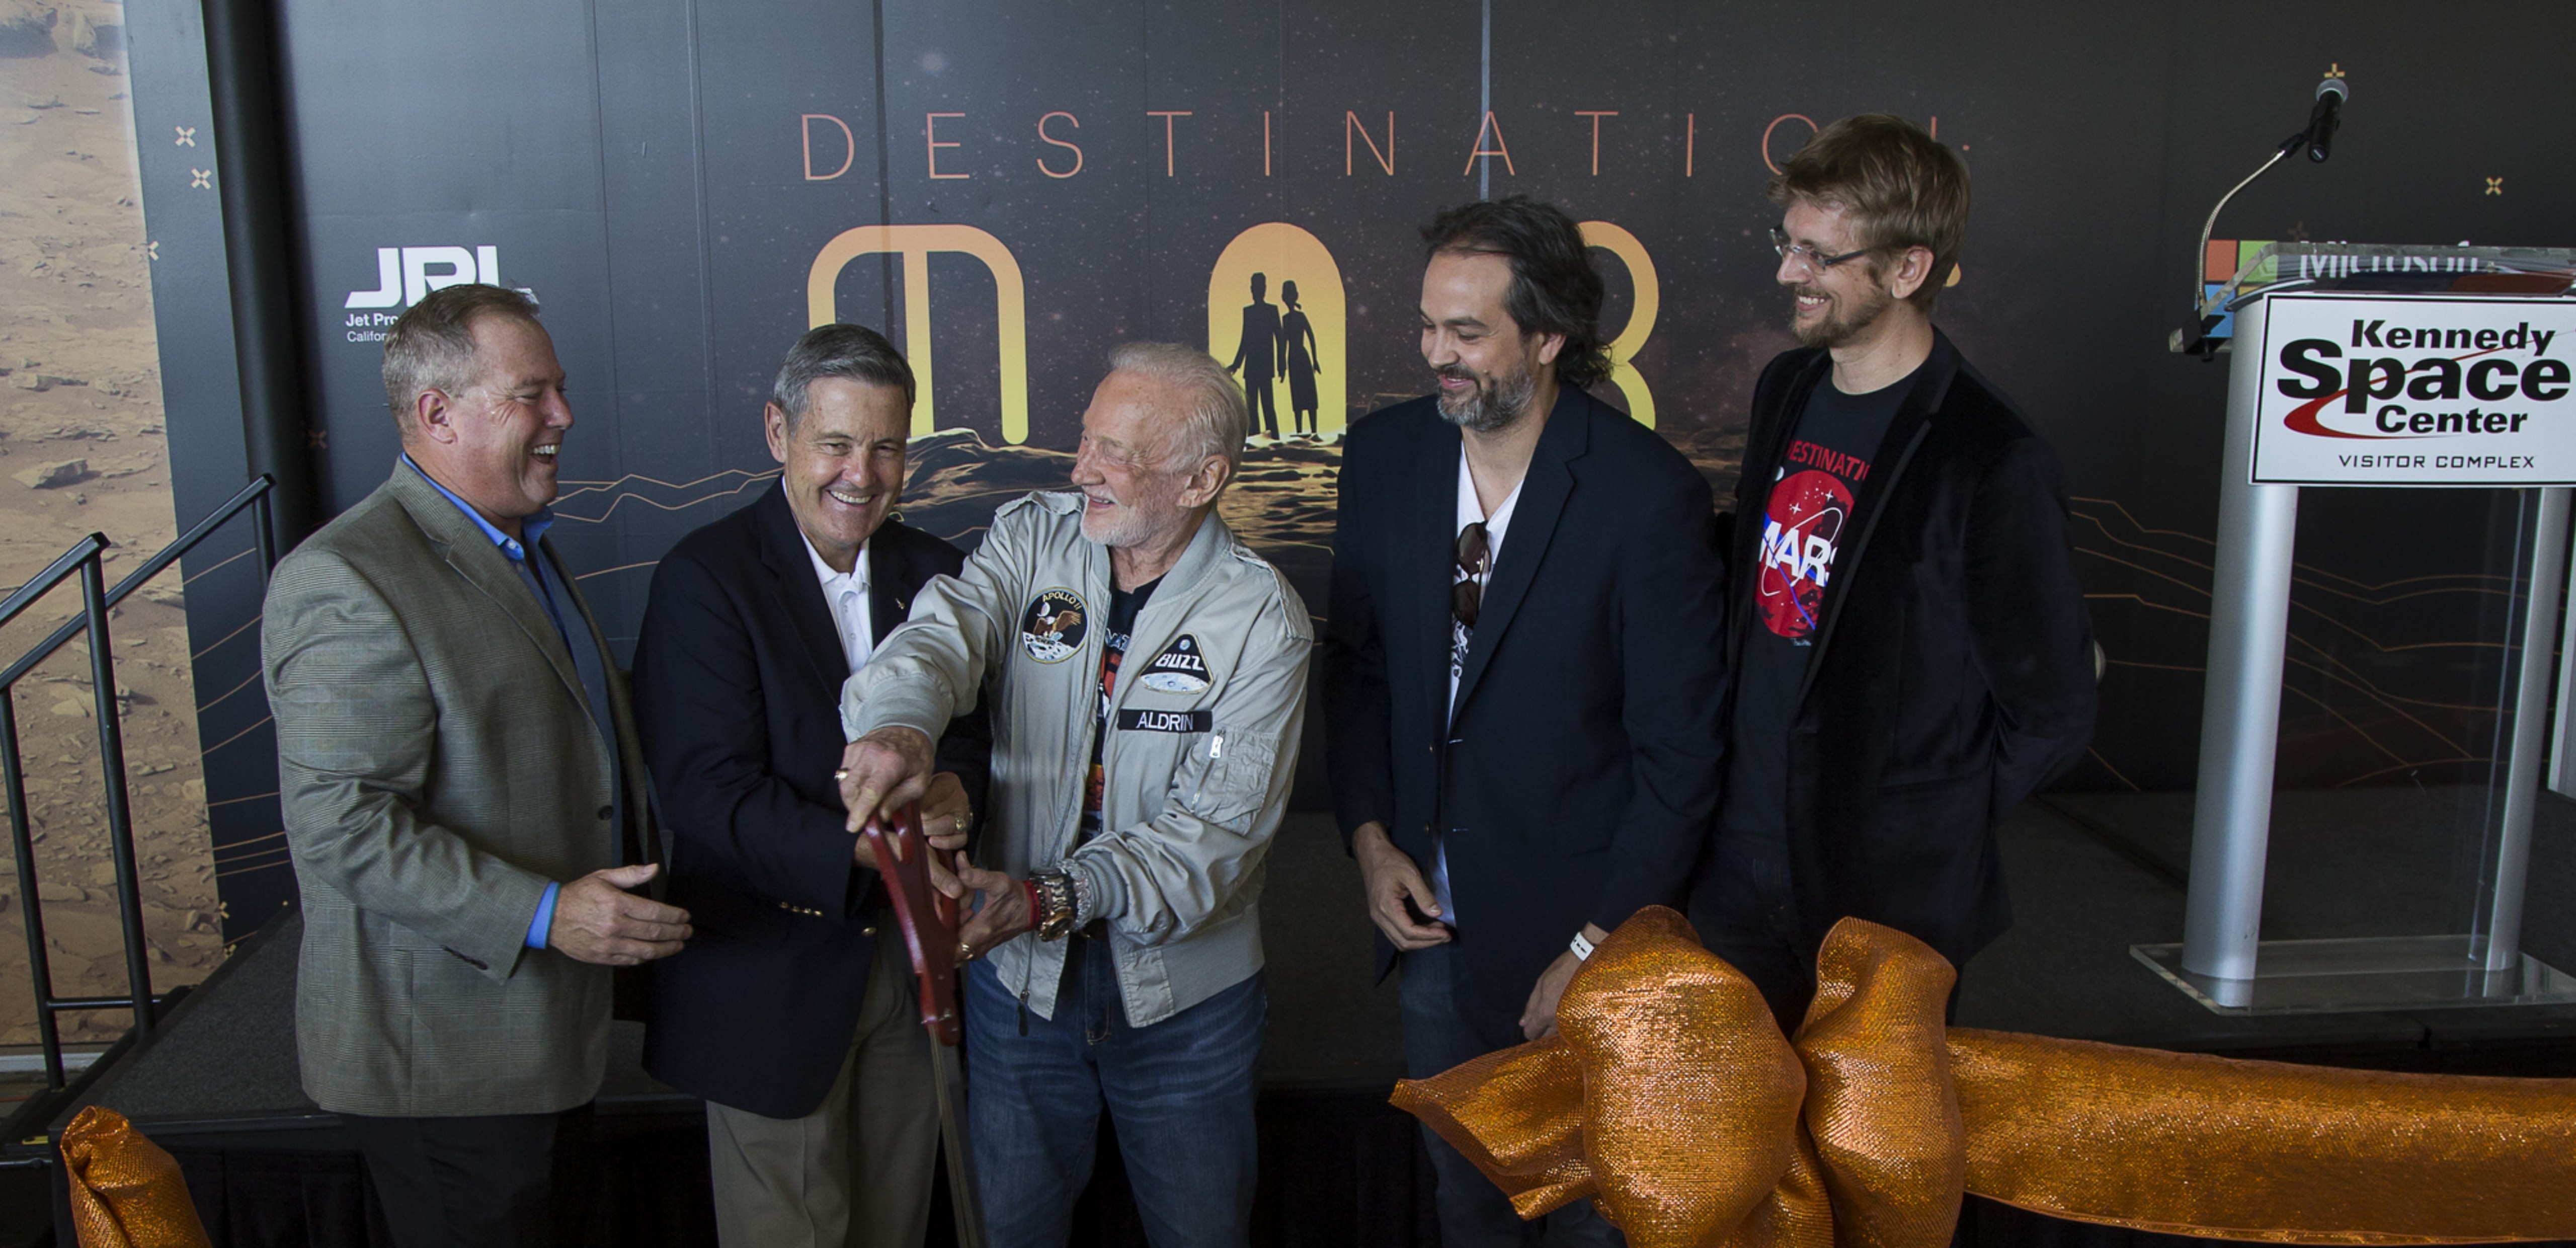 Kennedy Space Center, Kennedy Space Center Visitor Complex, NASA’s Jet Propulsion Laboratory and Microsoft HoloLens executives join Dr. Buzz Aldrin for the ribbon cutting of “Destination: Mars” at Kennedy Space Center Visitor Complex.